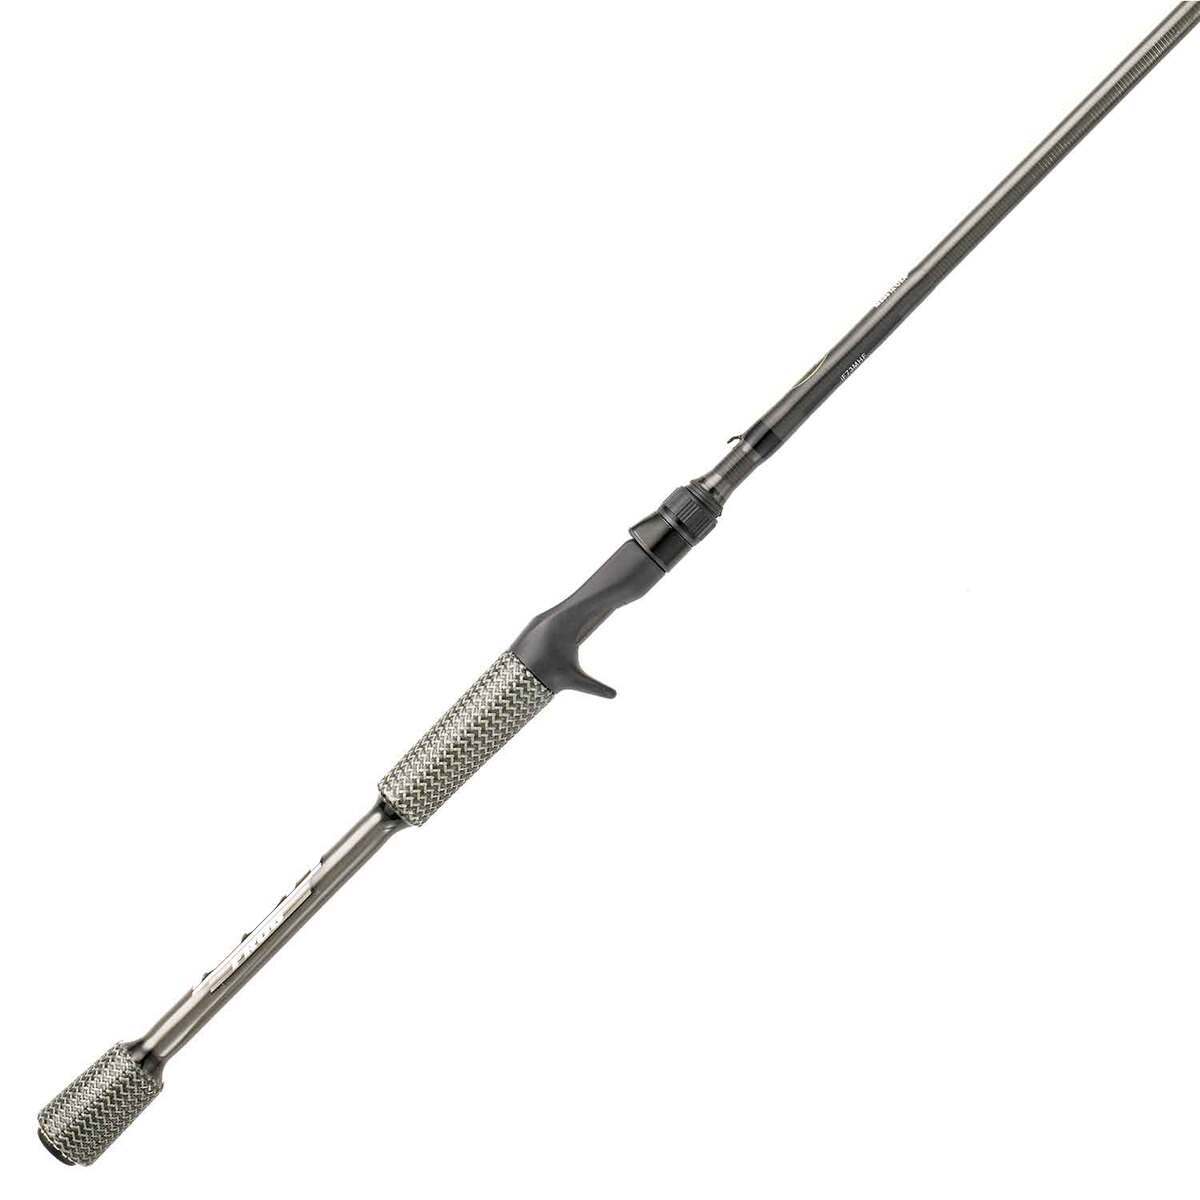 Cashion Fishing Rods ICON Frog Casting Rod - 7ft 4in, Heavy Power